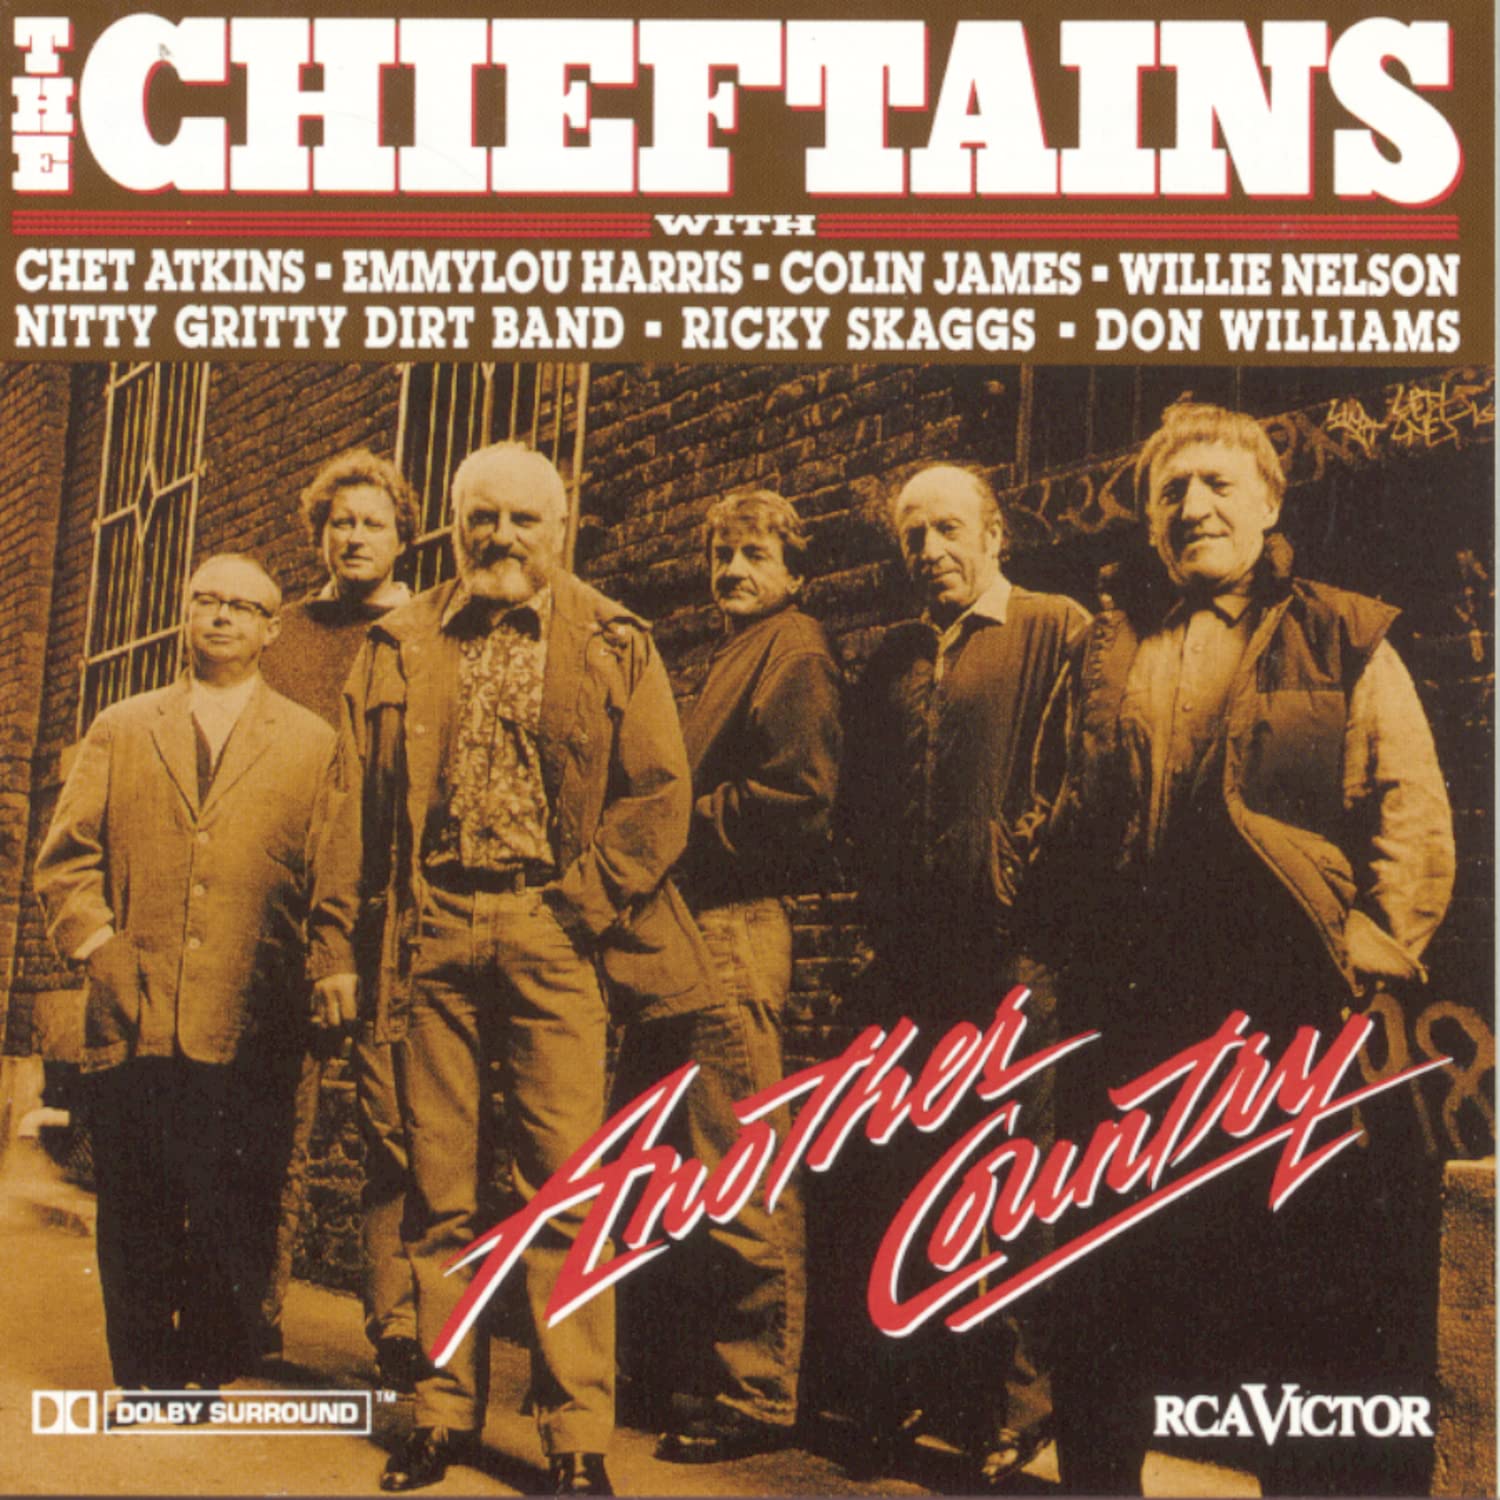 The Chieftains- Another Country - Darkside Records